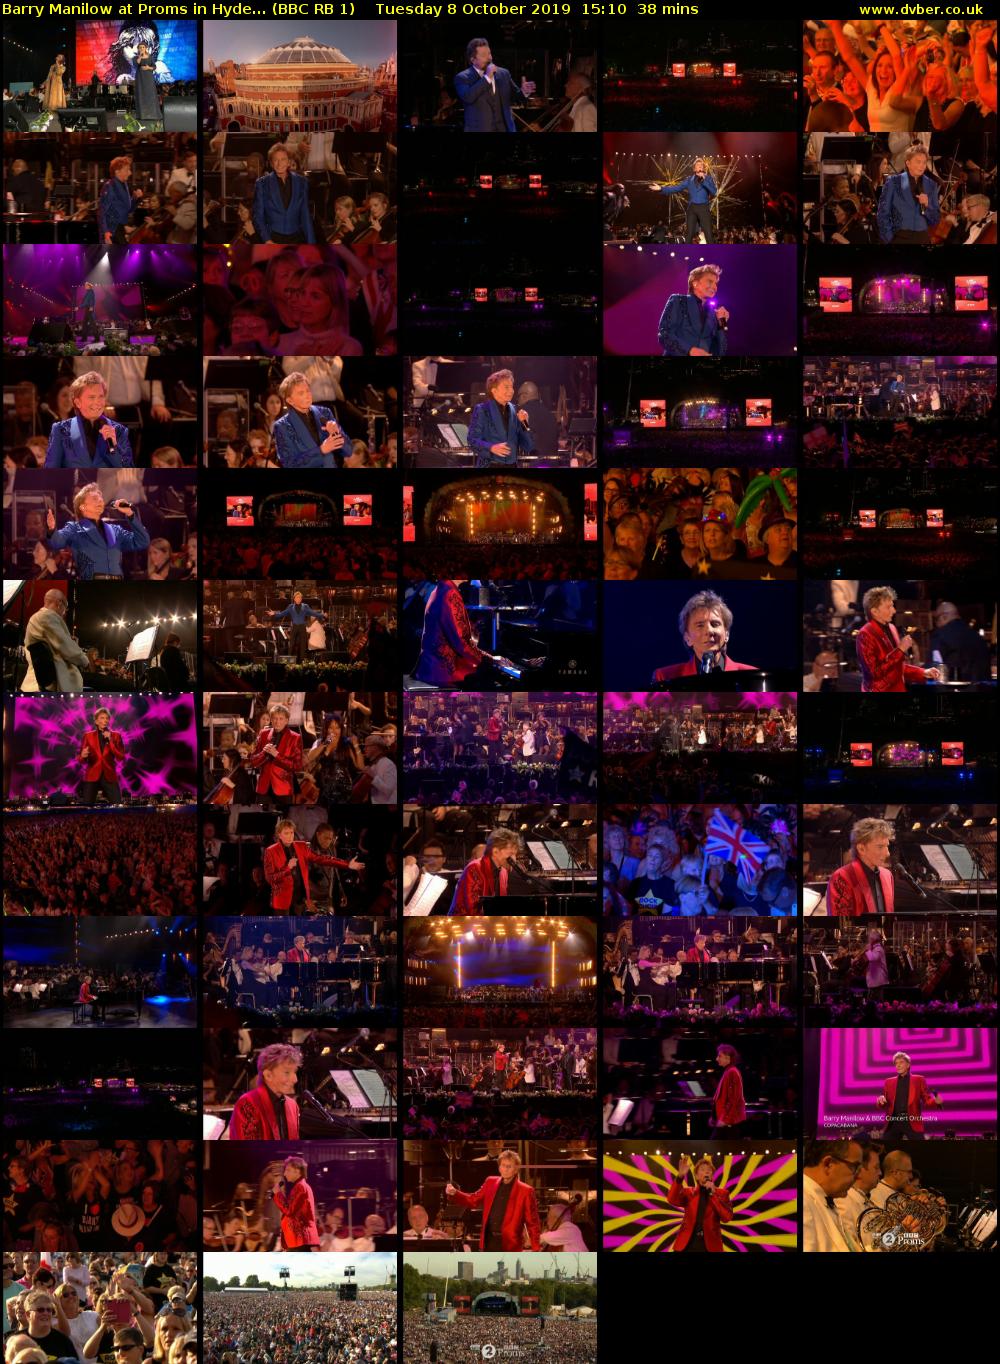 Barry Manilow at Proms in Hyde... (BBC RB 1) Tuesday 8 October 2019 15:10 - 15:48